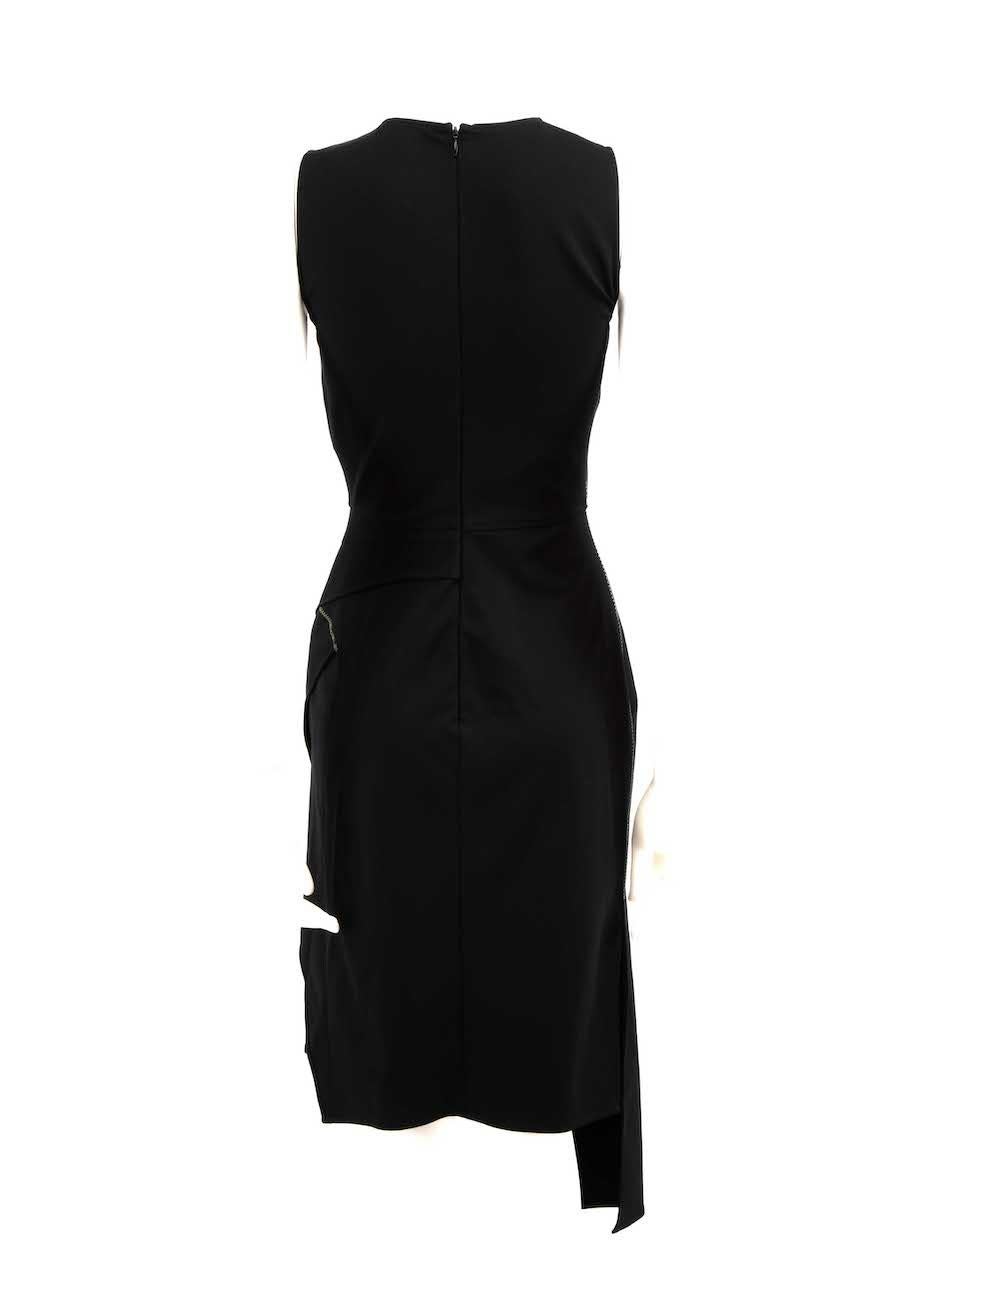 Versace Versus Versace Black Safety Pin Sleeveless Midi Dress Size S In Good Condition For Sale In London, GB